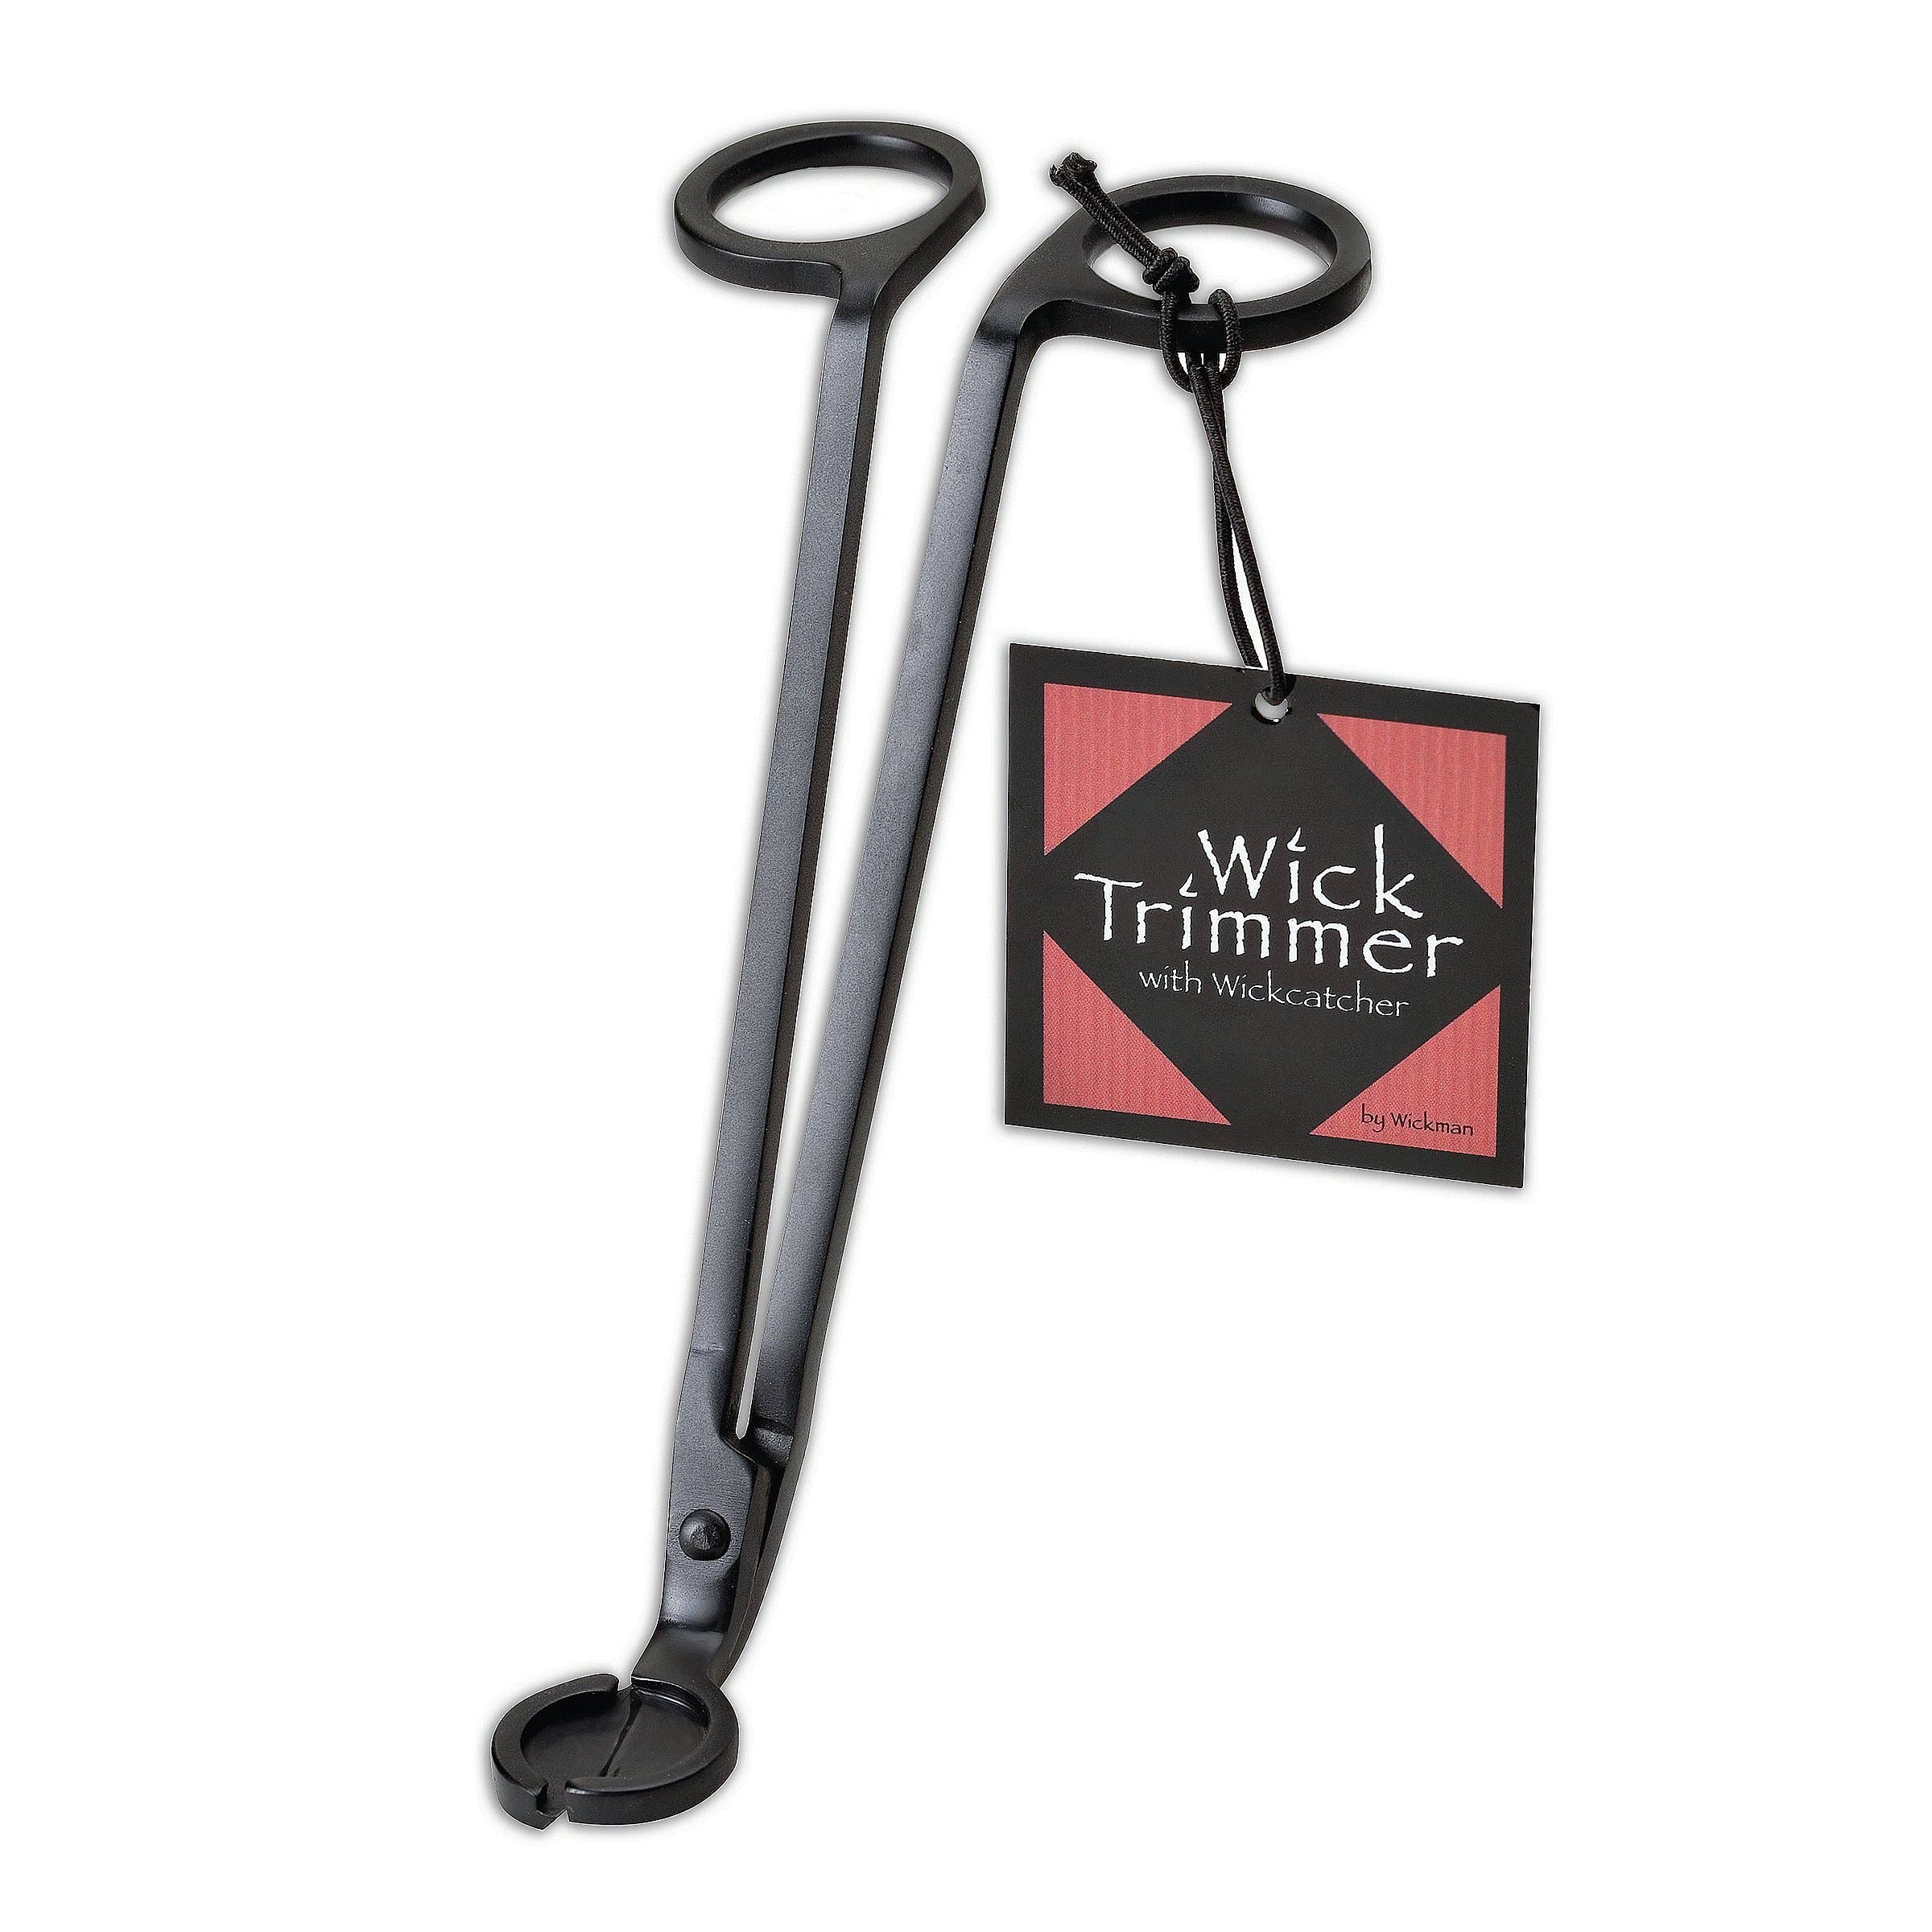 Wickman Products - Matte Black Wick Trimmer (7798996140259)